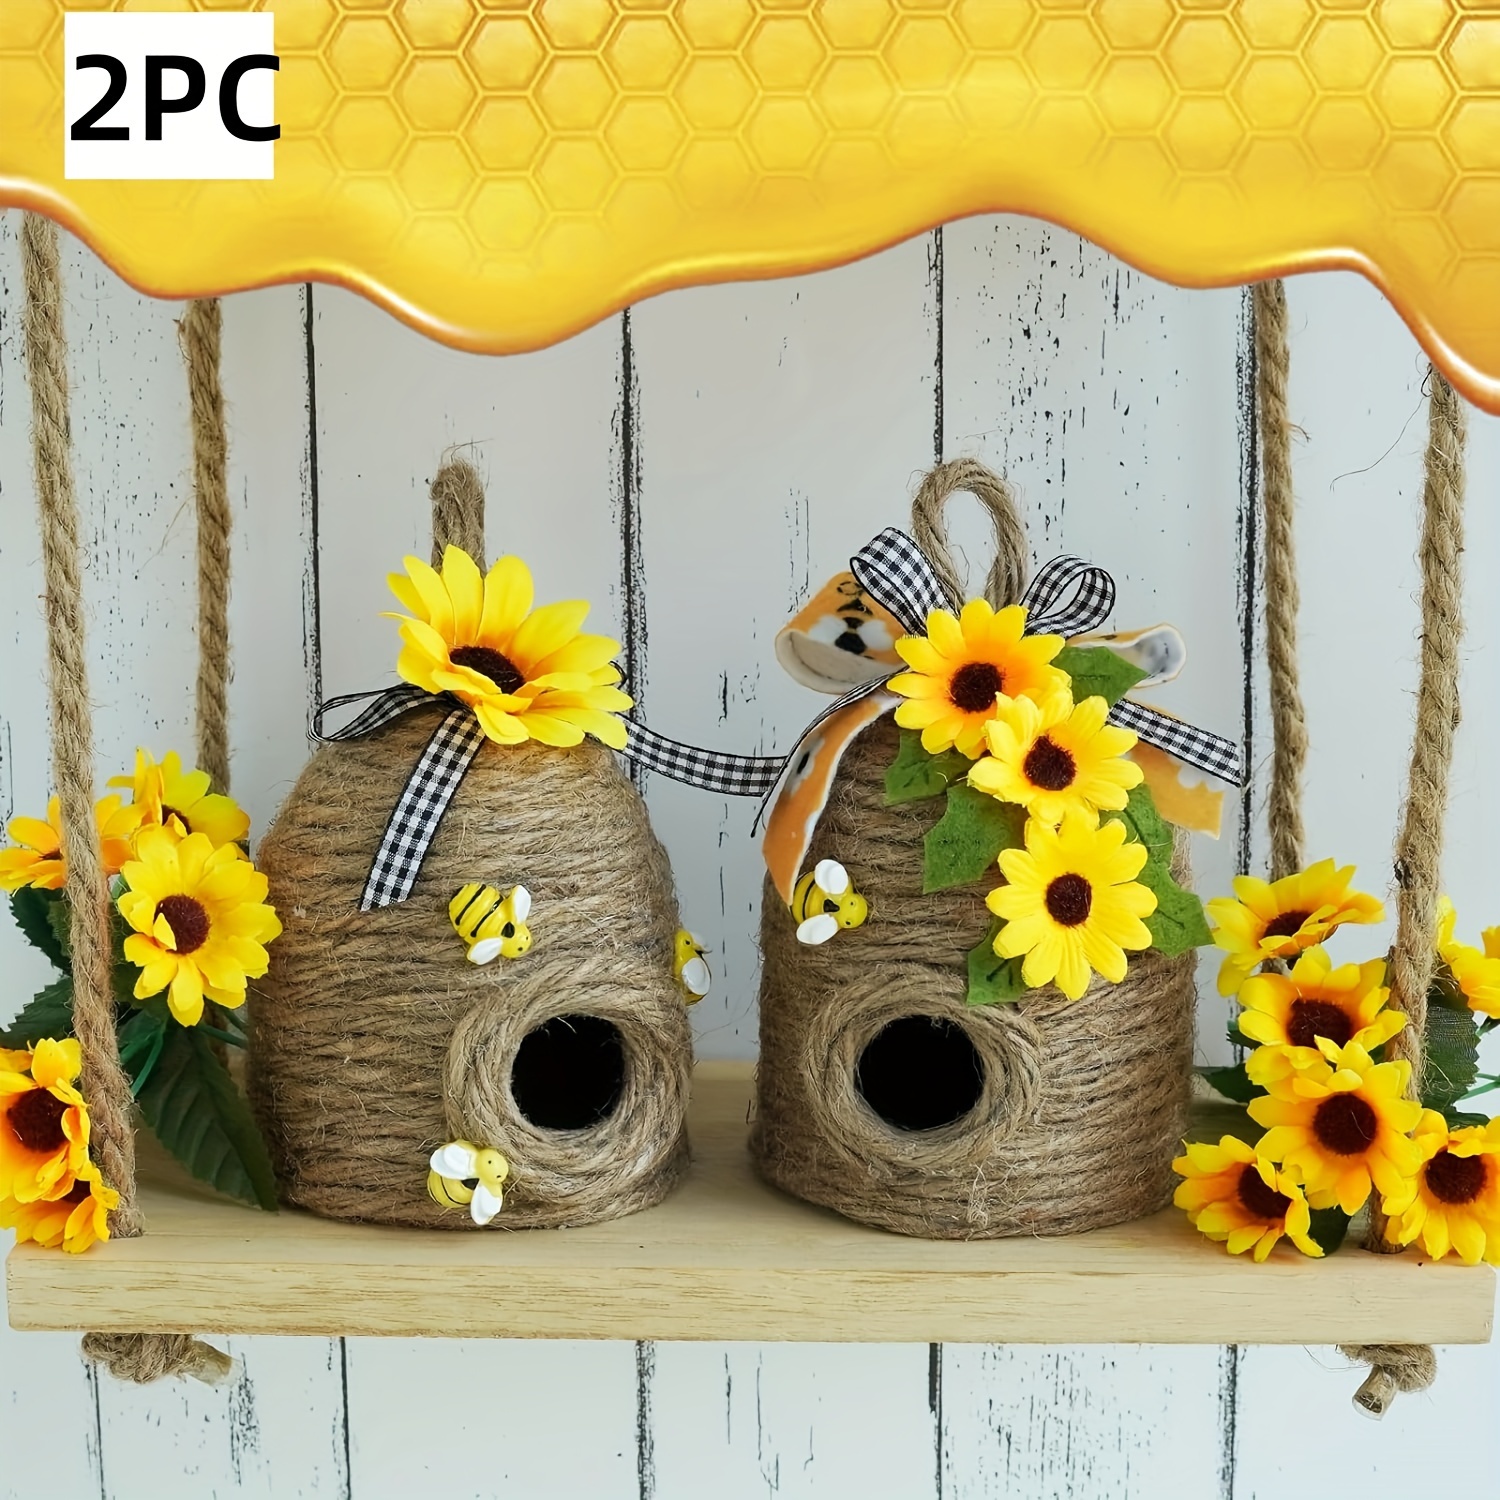 

2pcs, Bee Hive Decor, 2 Pack Bumble Bee Rustic Decor Hive, Natural Bee House, Bumble Bee Theme Party Decor Spring Summer Rustic Farmhouse Kitchecn Table Decor, Honey Bee Tiered Tray Decor